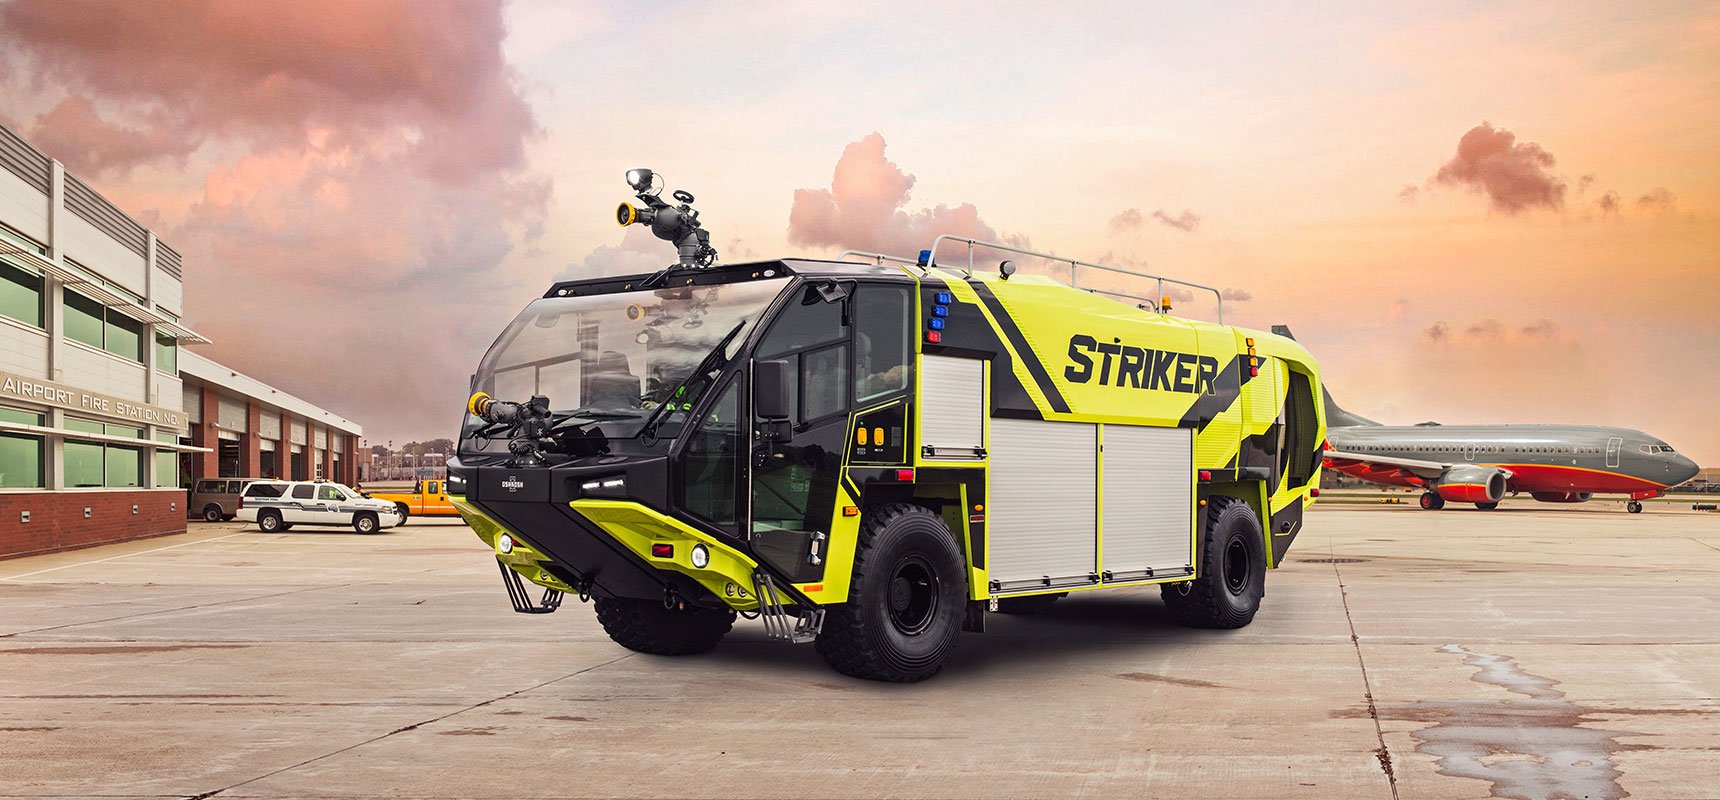 Oshkosh Airport Products Striker 4x4 at an airfield